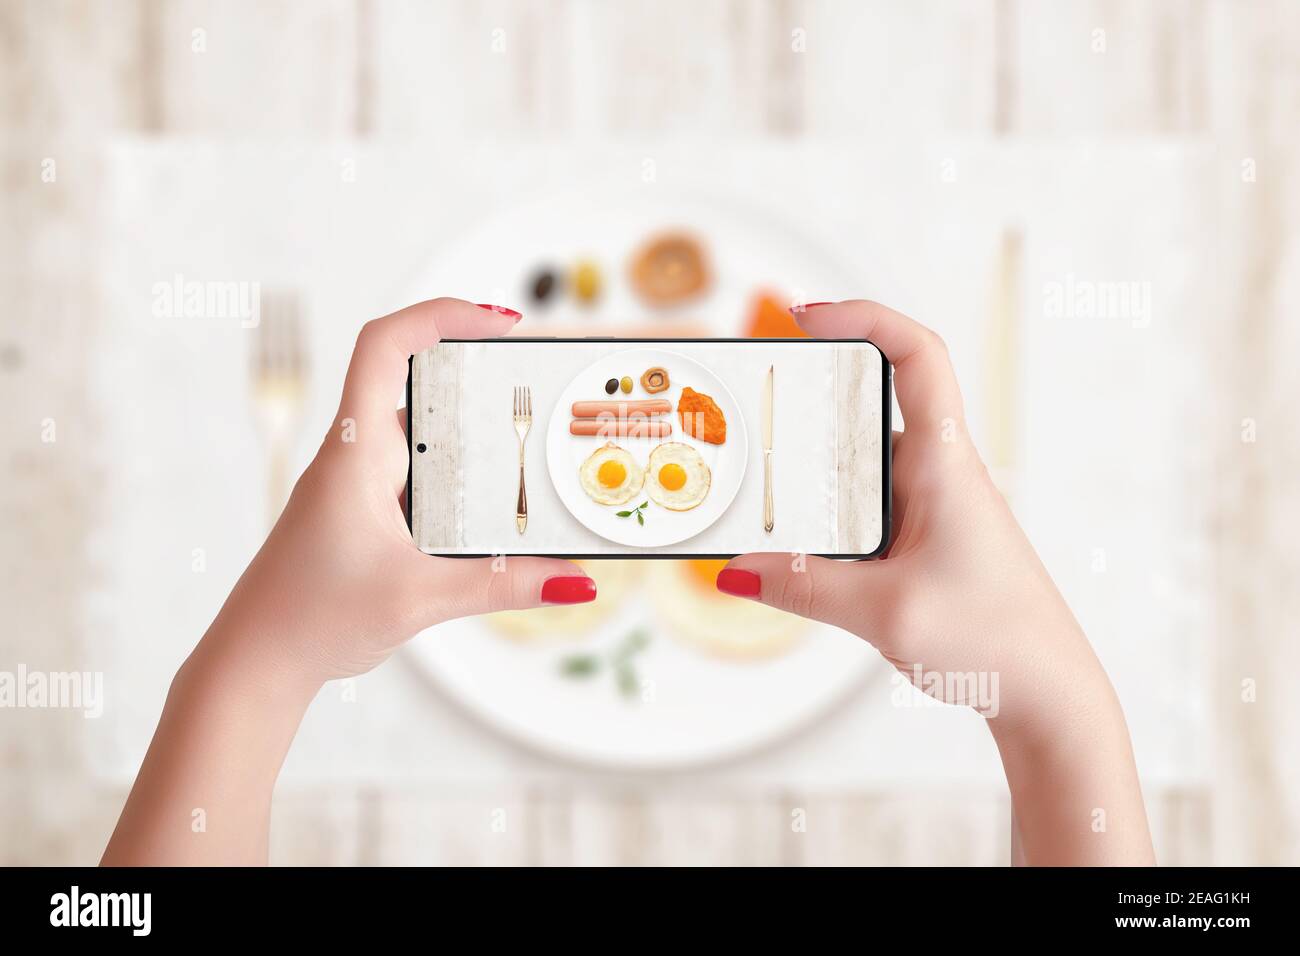 Taking photo of breakfast with phone. Woman holding smart phone in horizontal position Stock Photo